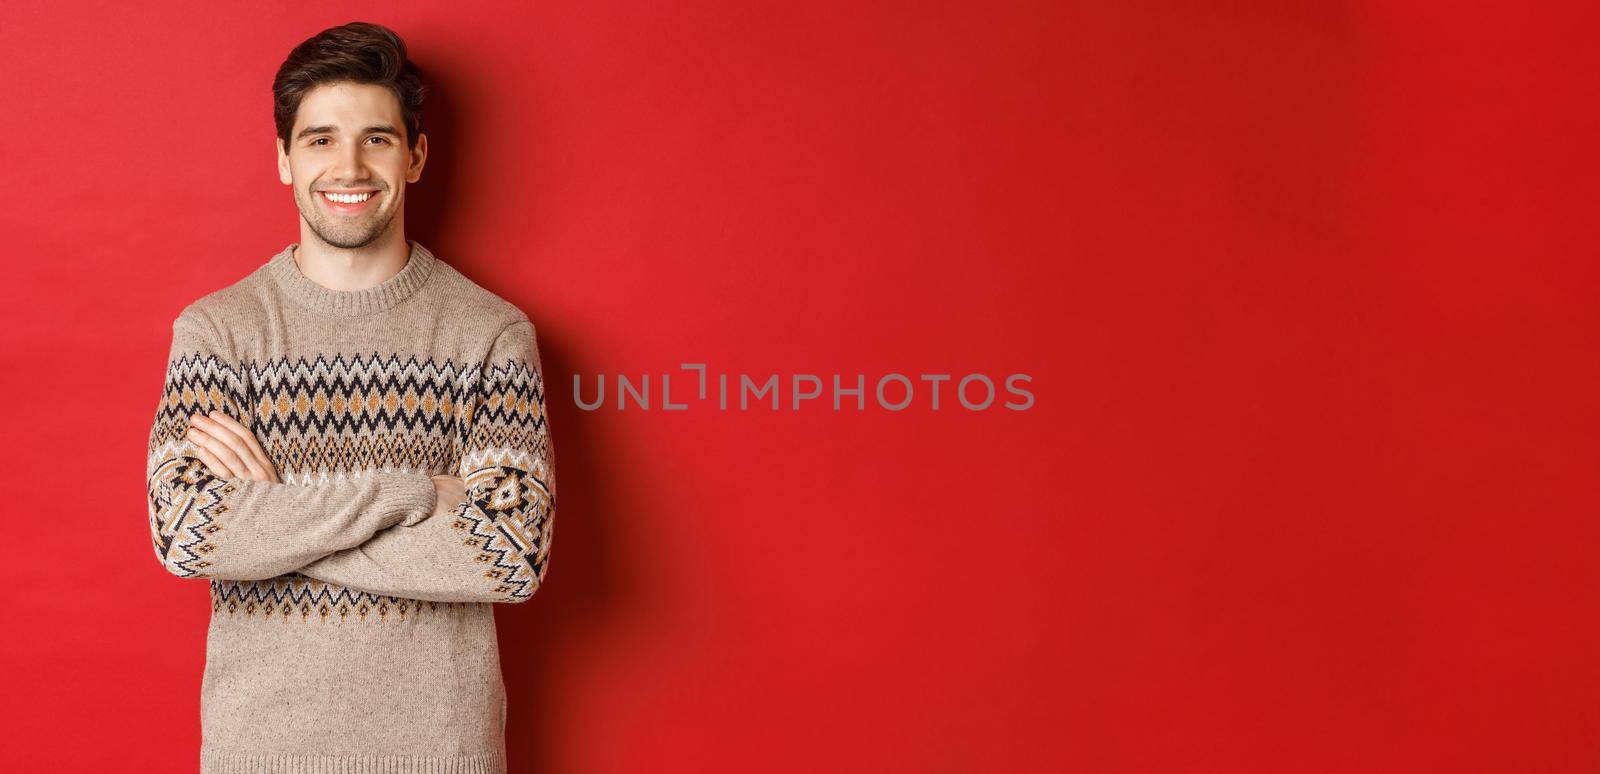 Image of handsome happy guy in christmas sweater, smiling and looking at camera, celebrating xmas holidays, standing over red background.